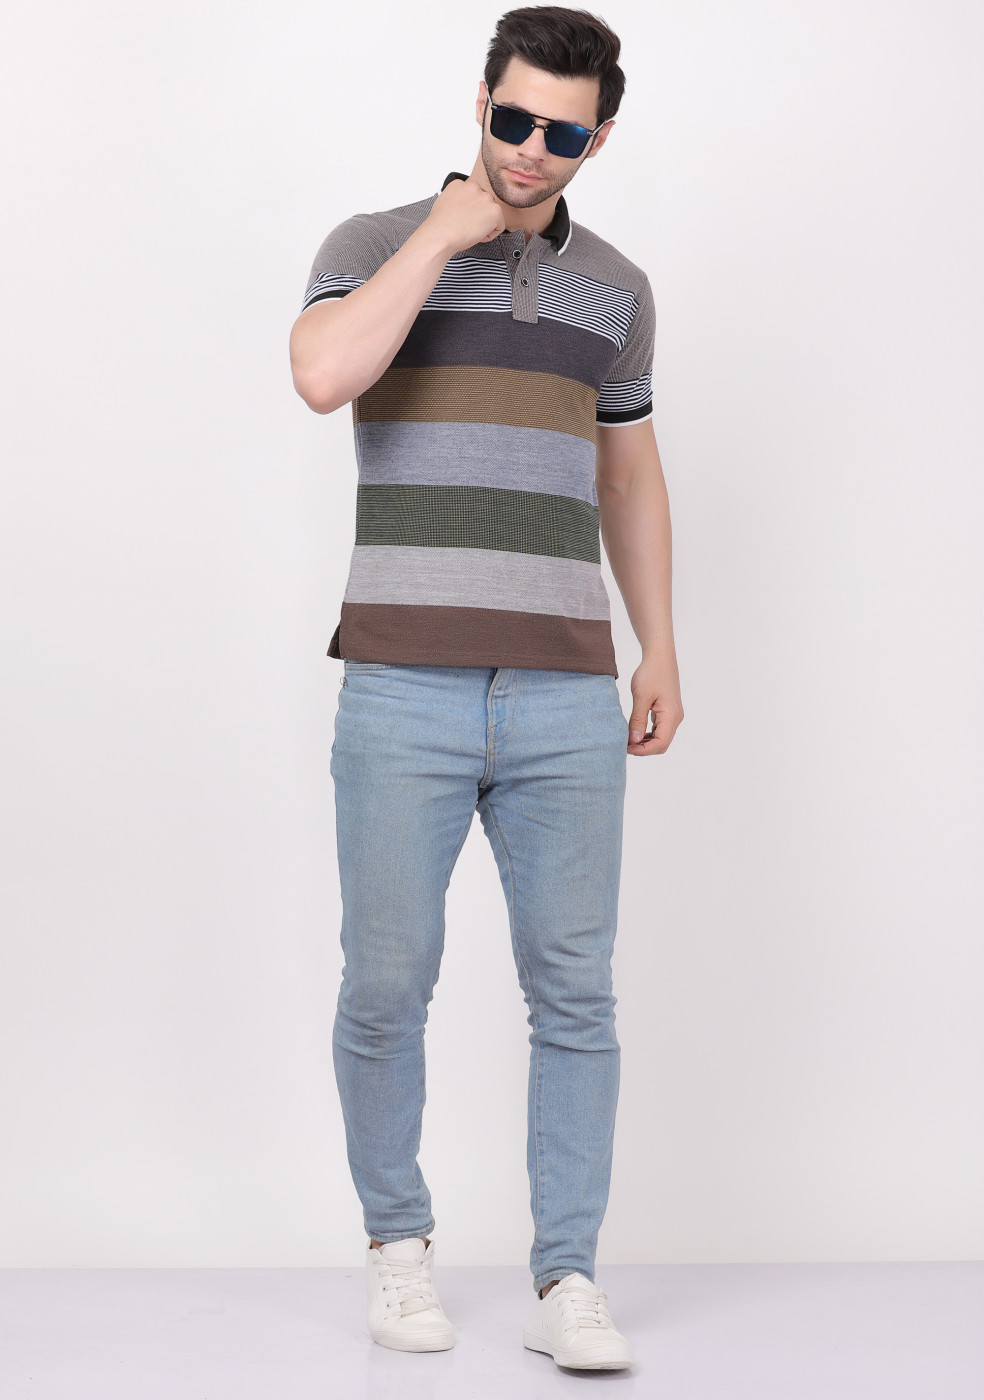 Striped Cotton Collar Polo T-Shirts For Men